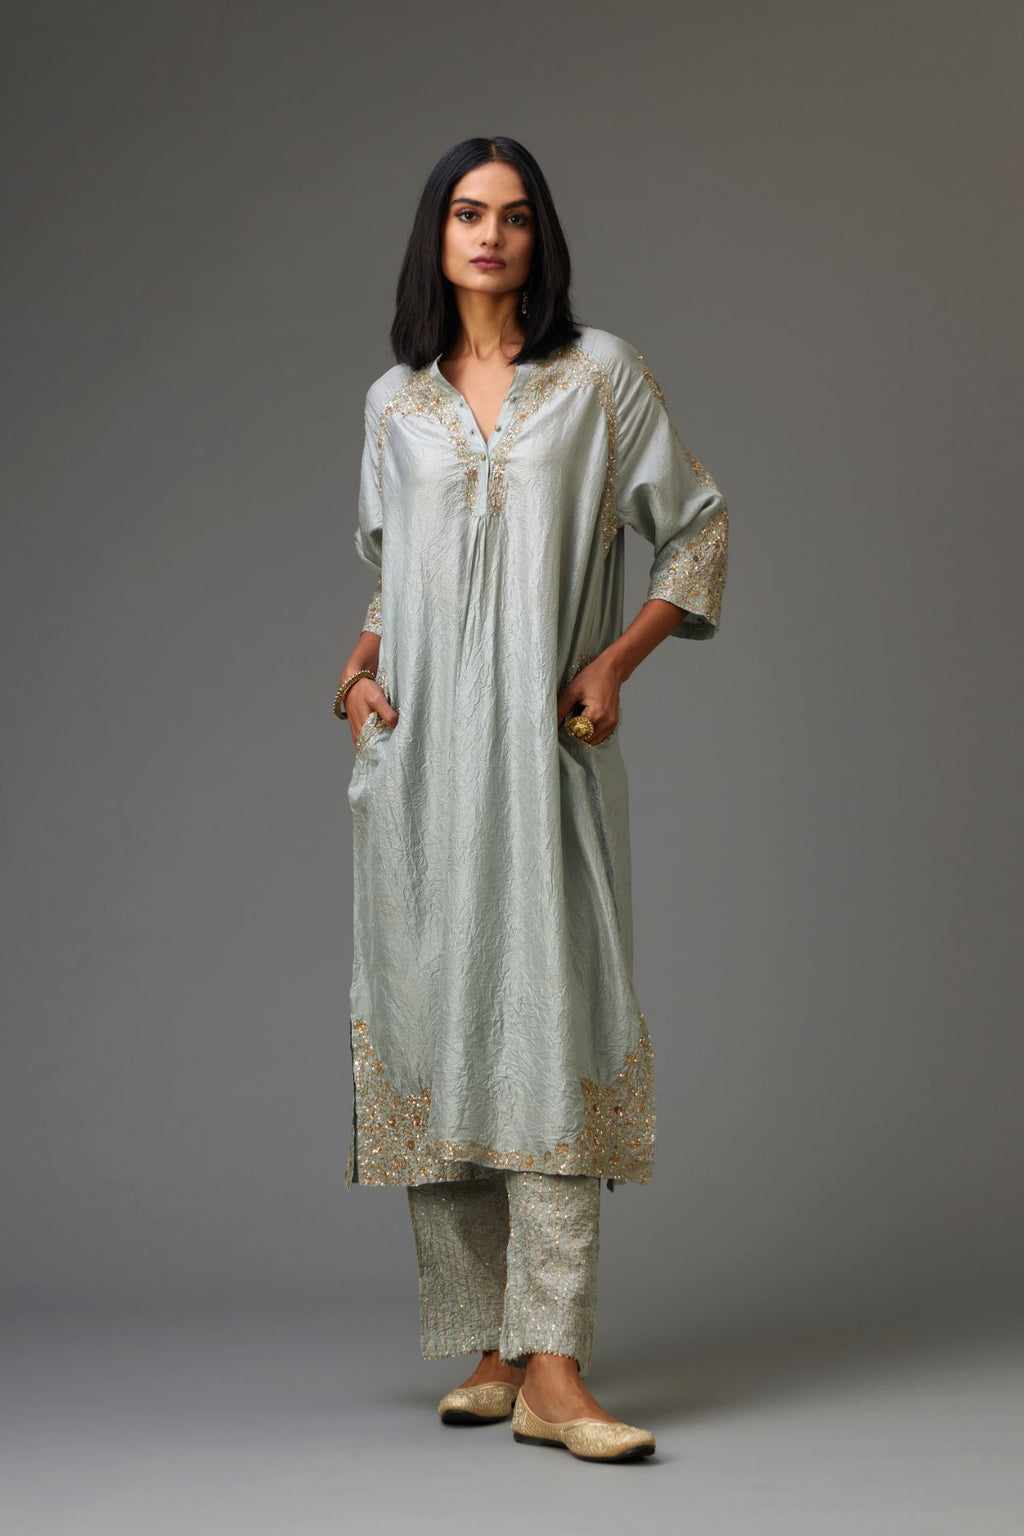 Blue silk hand crushed kurta set with button placket neckline, highlighted with gold sequins work at hem, neck and armhole.